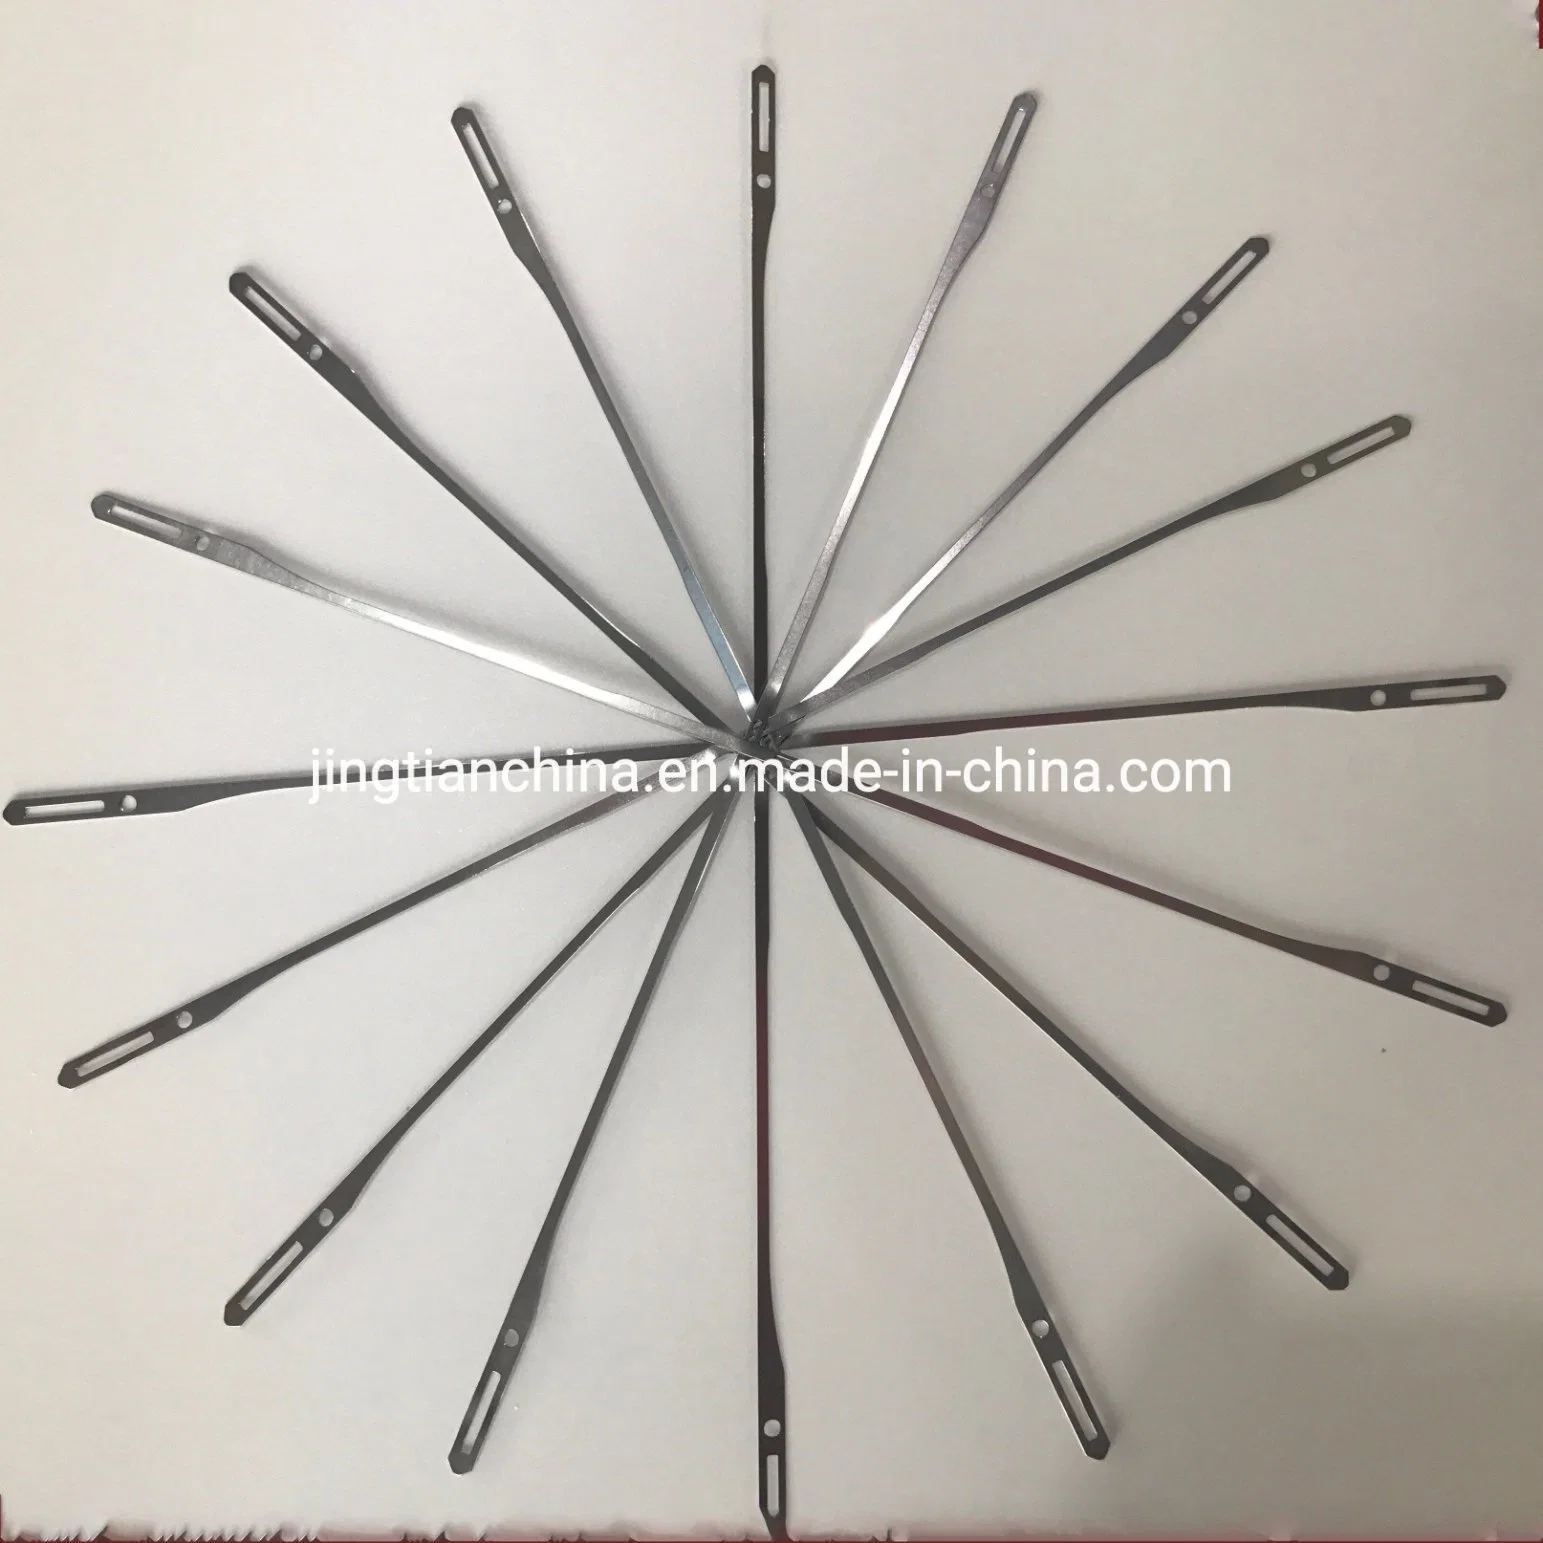 Textile Machine Spare Parts Stainless Steel Heald Wire with Middle Eye for Weaving Loom